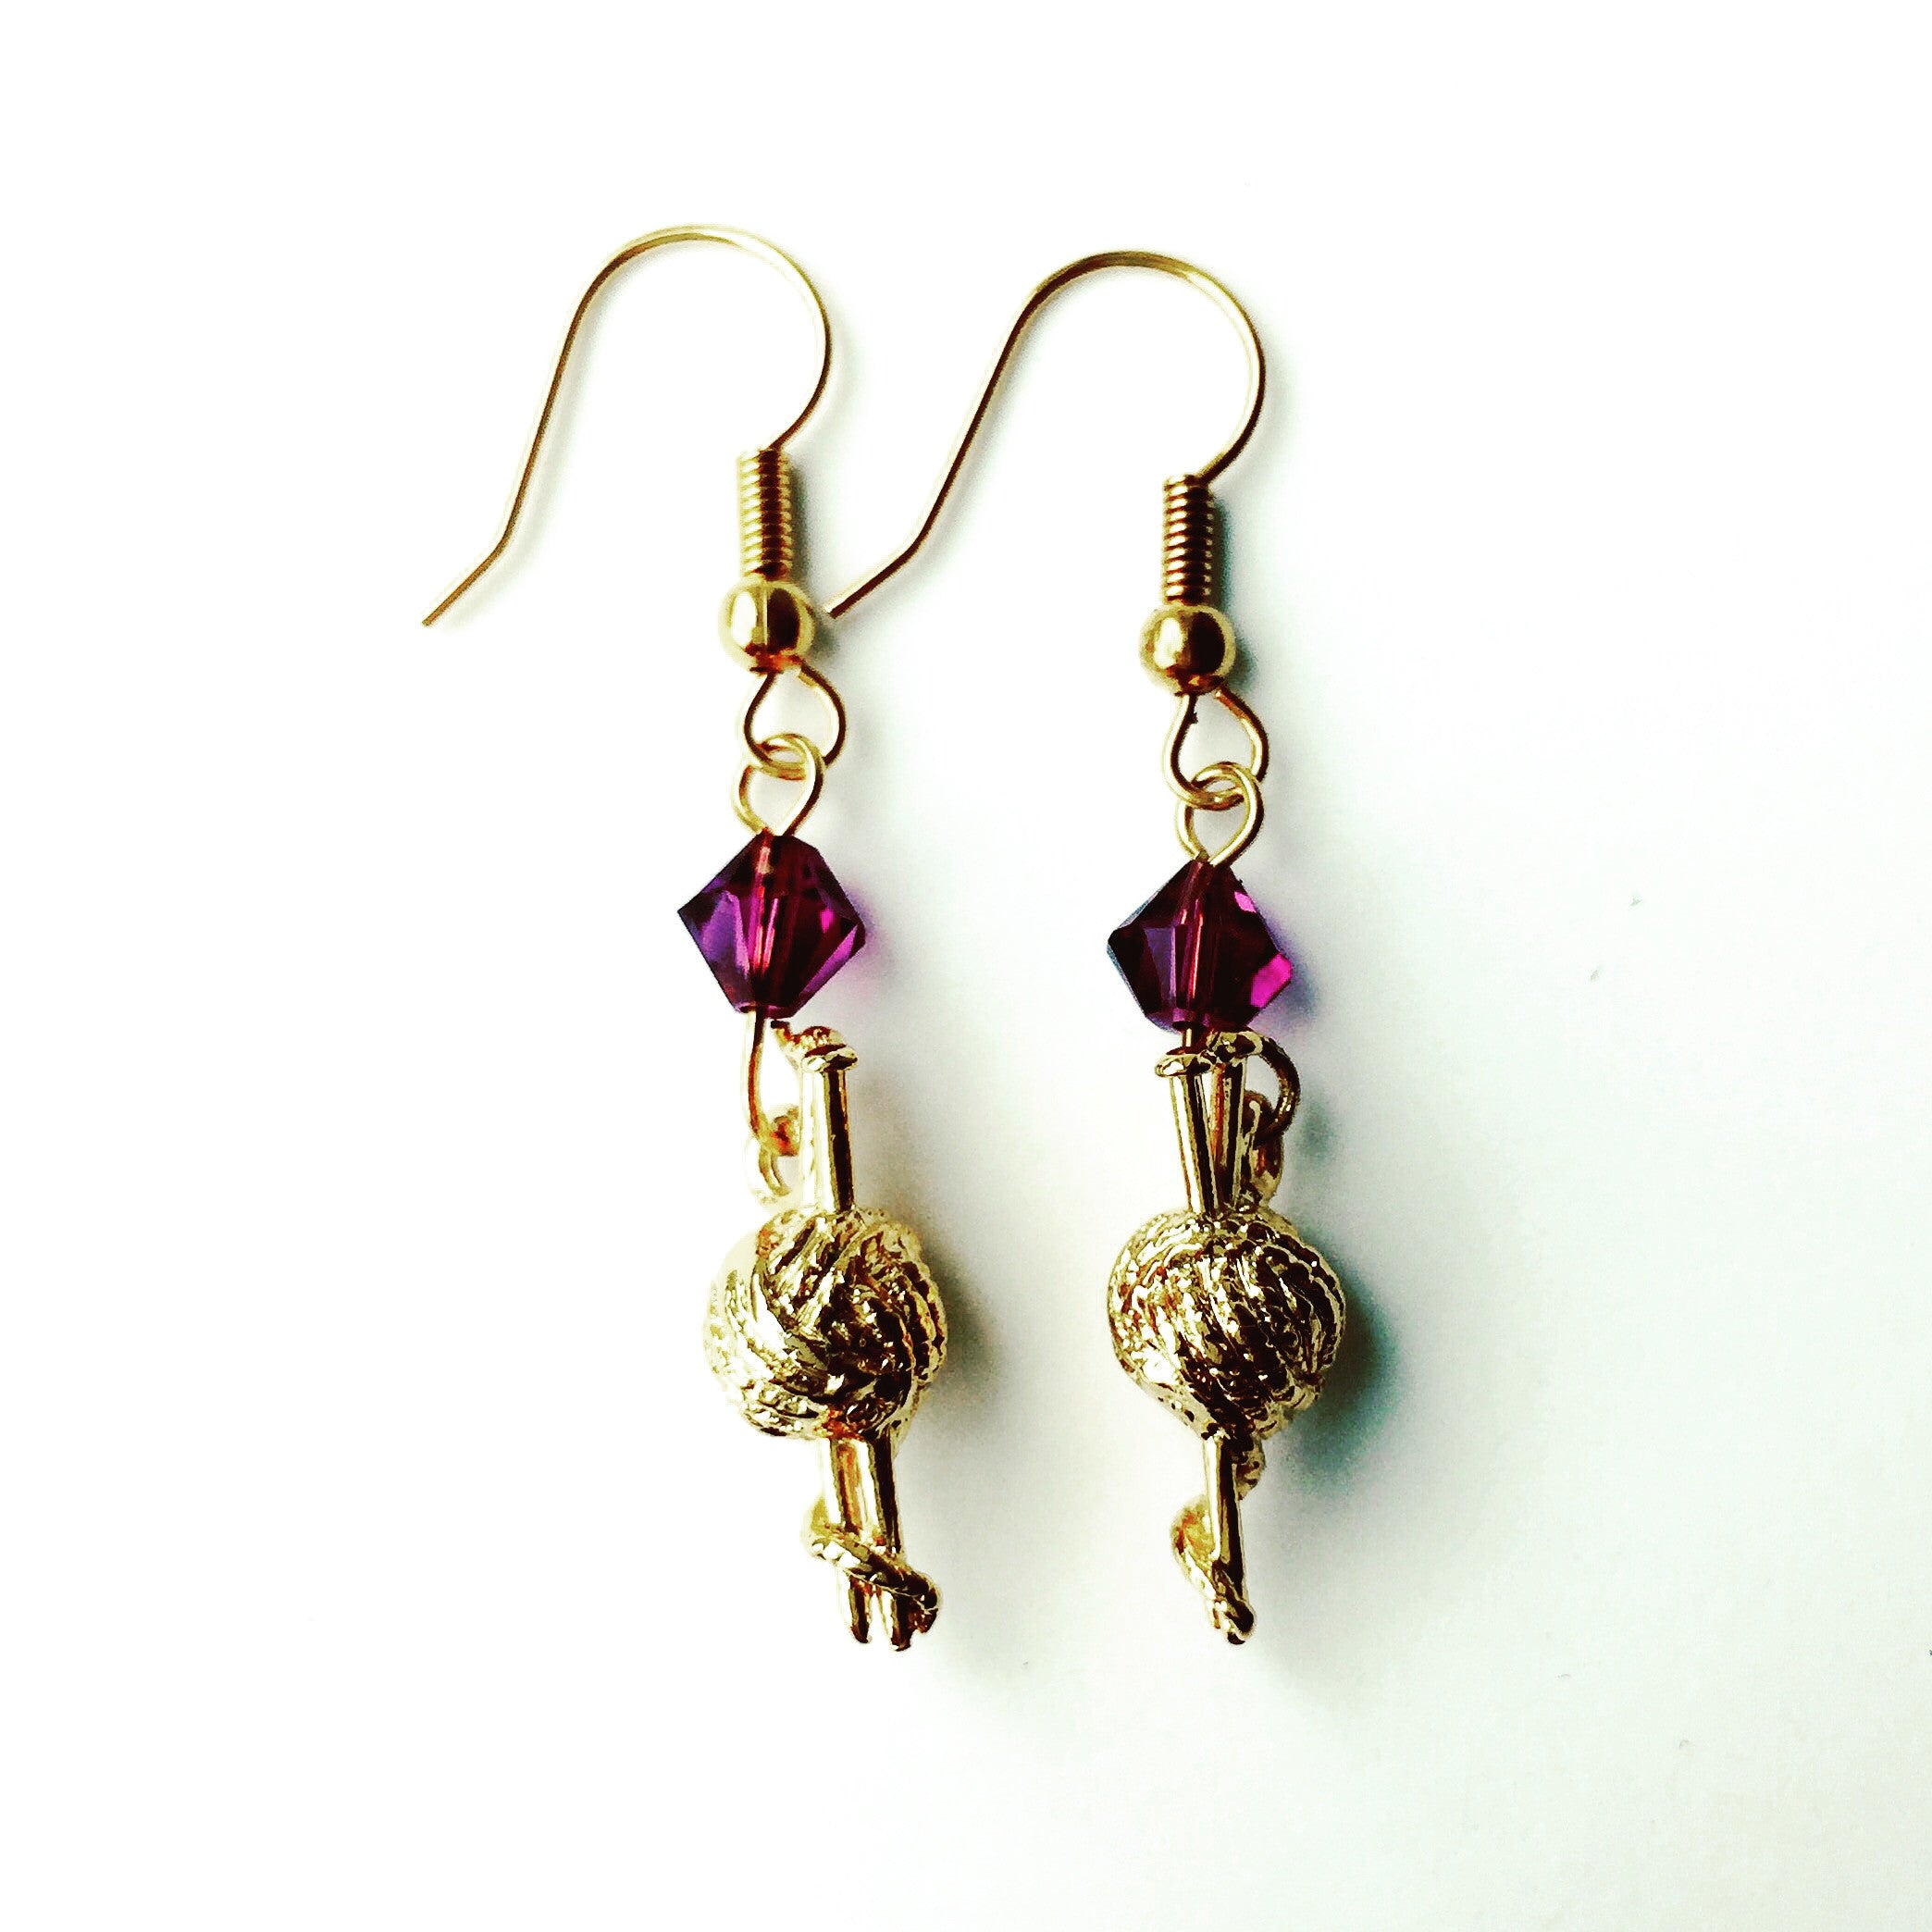 ____ Ball of Thread Gold Earrings with Purple Swarovski Crystals